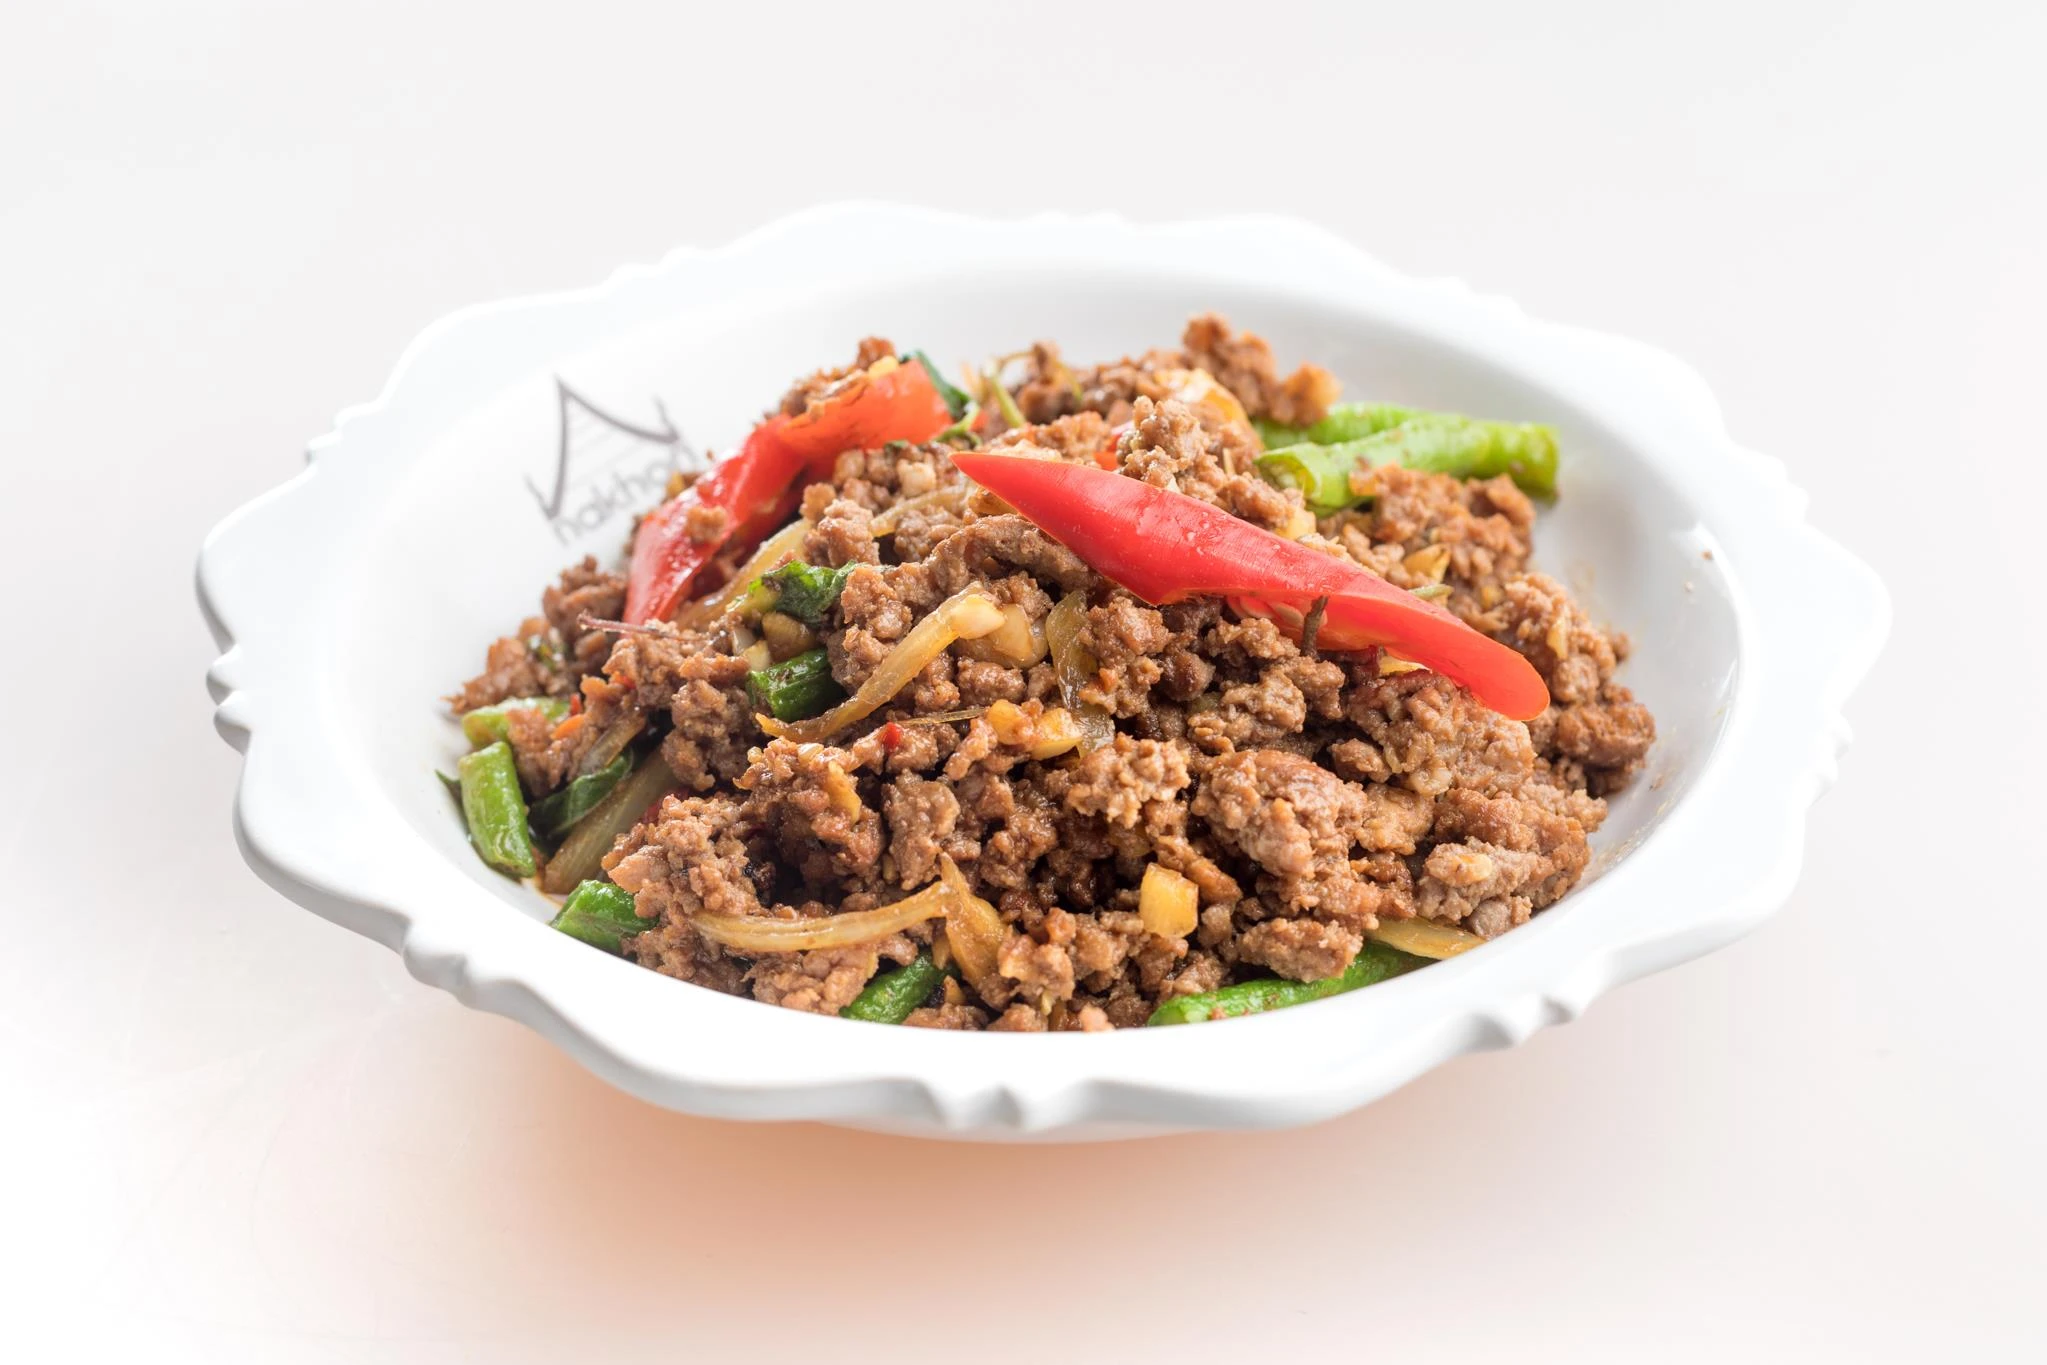 Stir-fried minced beef with hot basil leaves